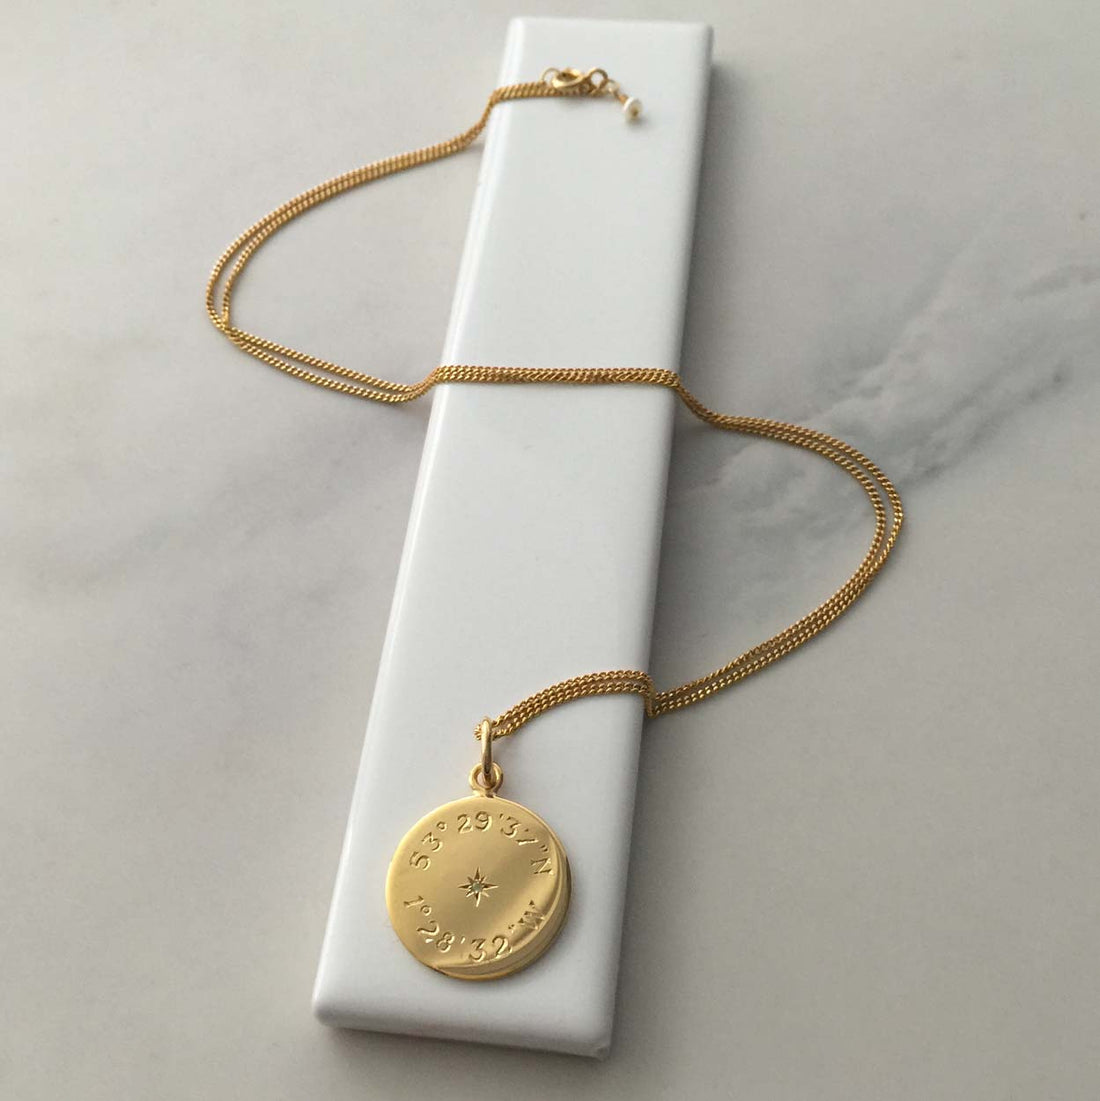 Handmade Diamond Latitude and Longitude Necklace in gold vermeil, featuring personalized coordinates, evoking celestial navigation and cherished memories